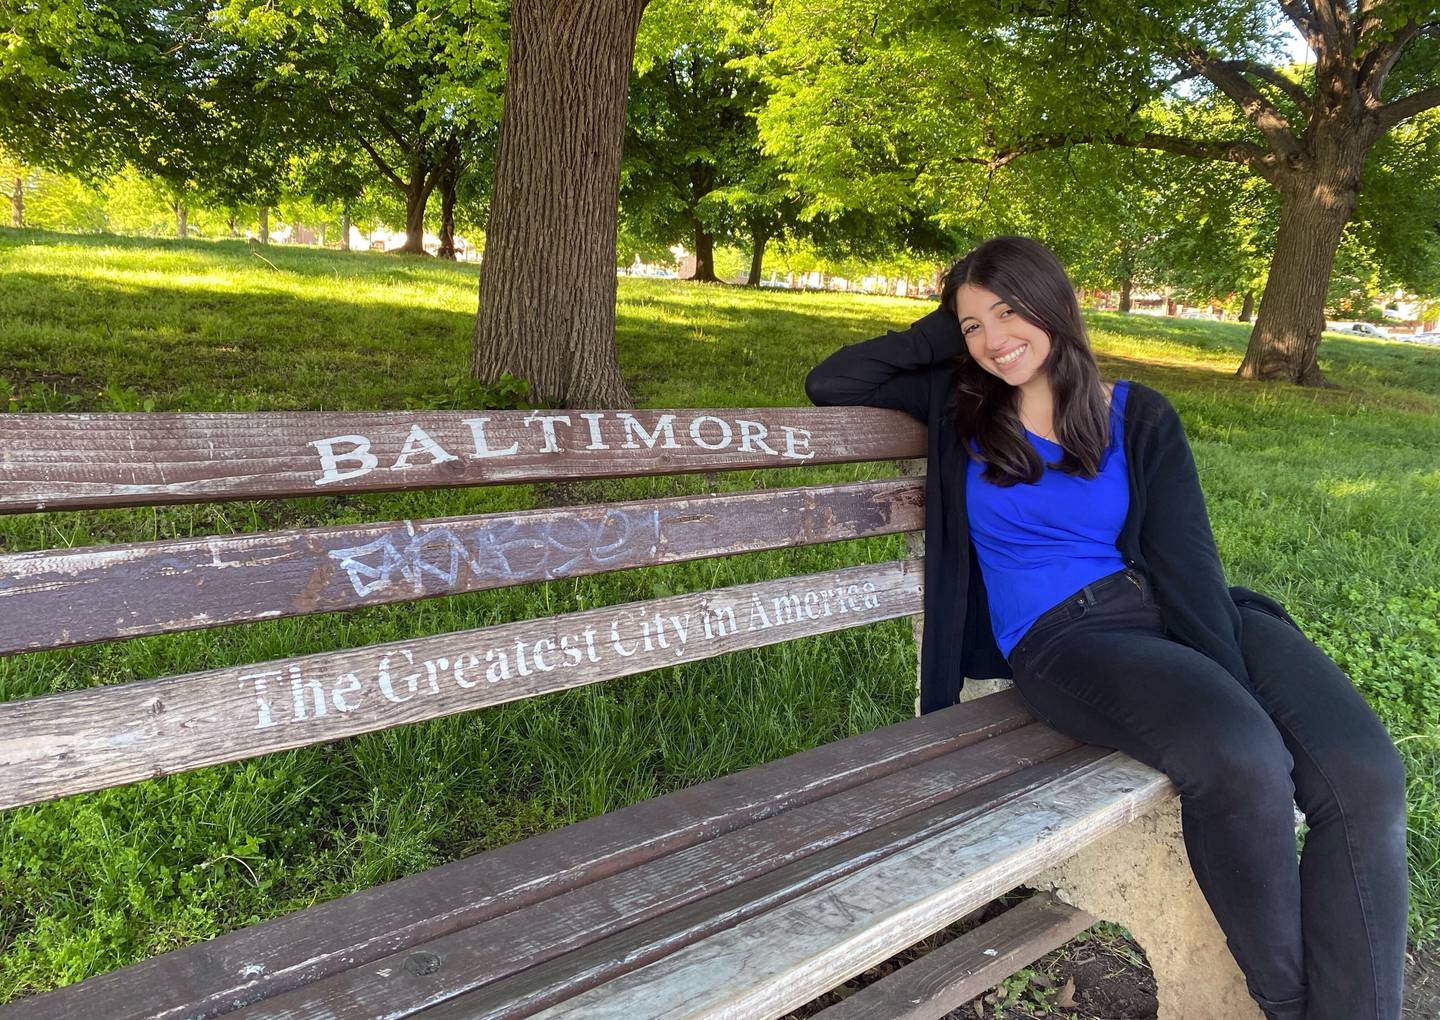 Baltimore Banner reporter Hallie Miller sits in Patterson Park on one of the iconic Baltimore, "The Greatest City in America" benches. Photo by Joanna Kozlowski DuBose